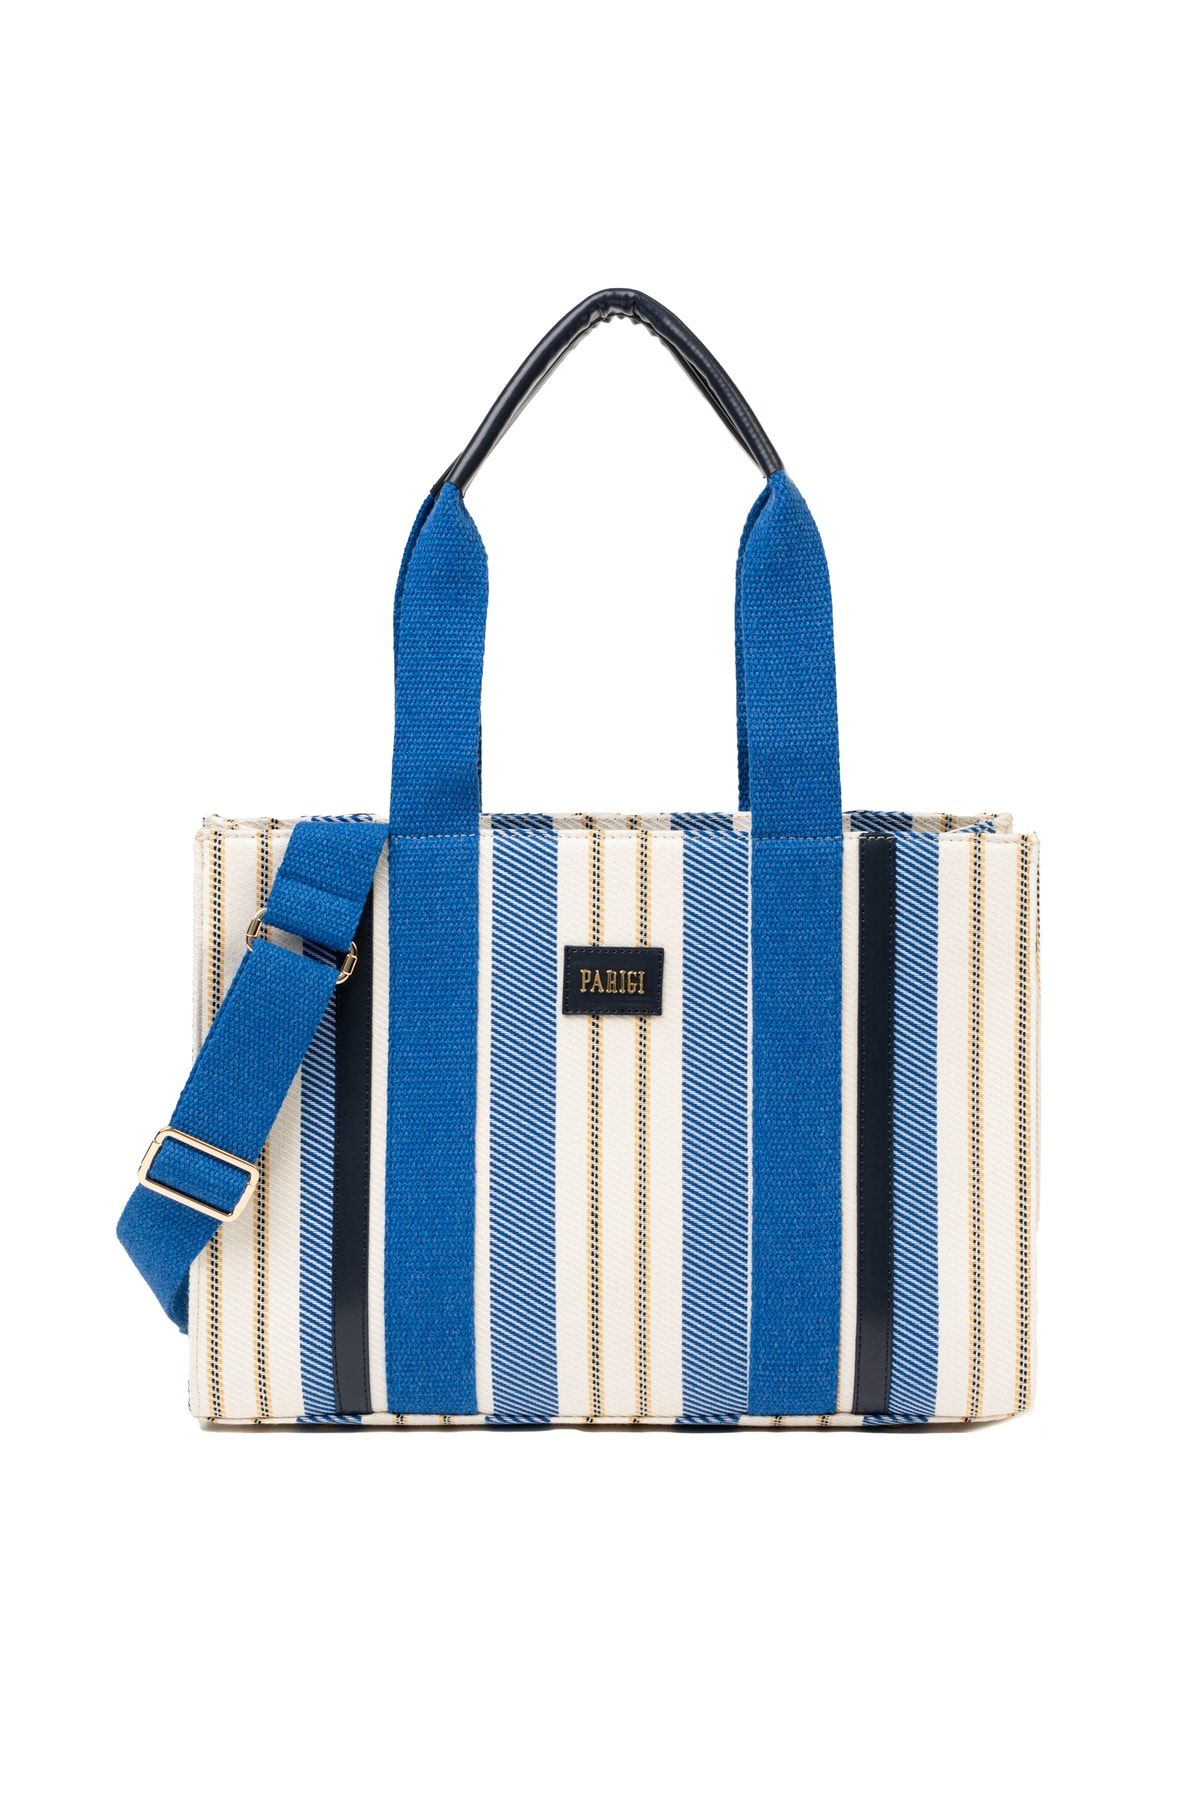 Crossbody Bags for Women,Striped Bag Big Canvas Tote Bag for Women Summer  Beach Fabric Soft Large Handbag Female Large Casual Top Handle Bag Tote Bag  for Women School Blue One Size -